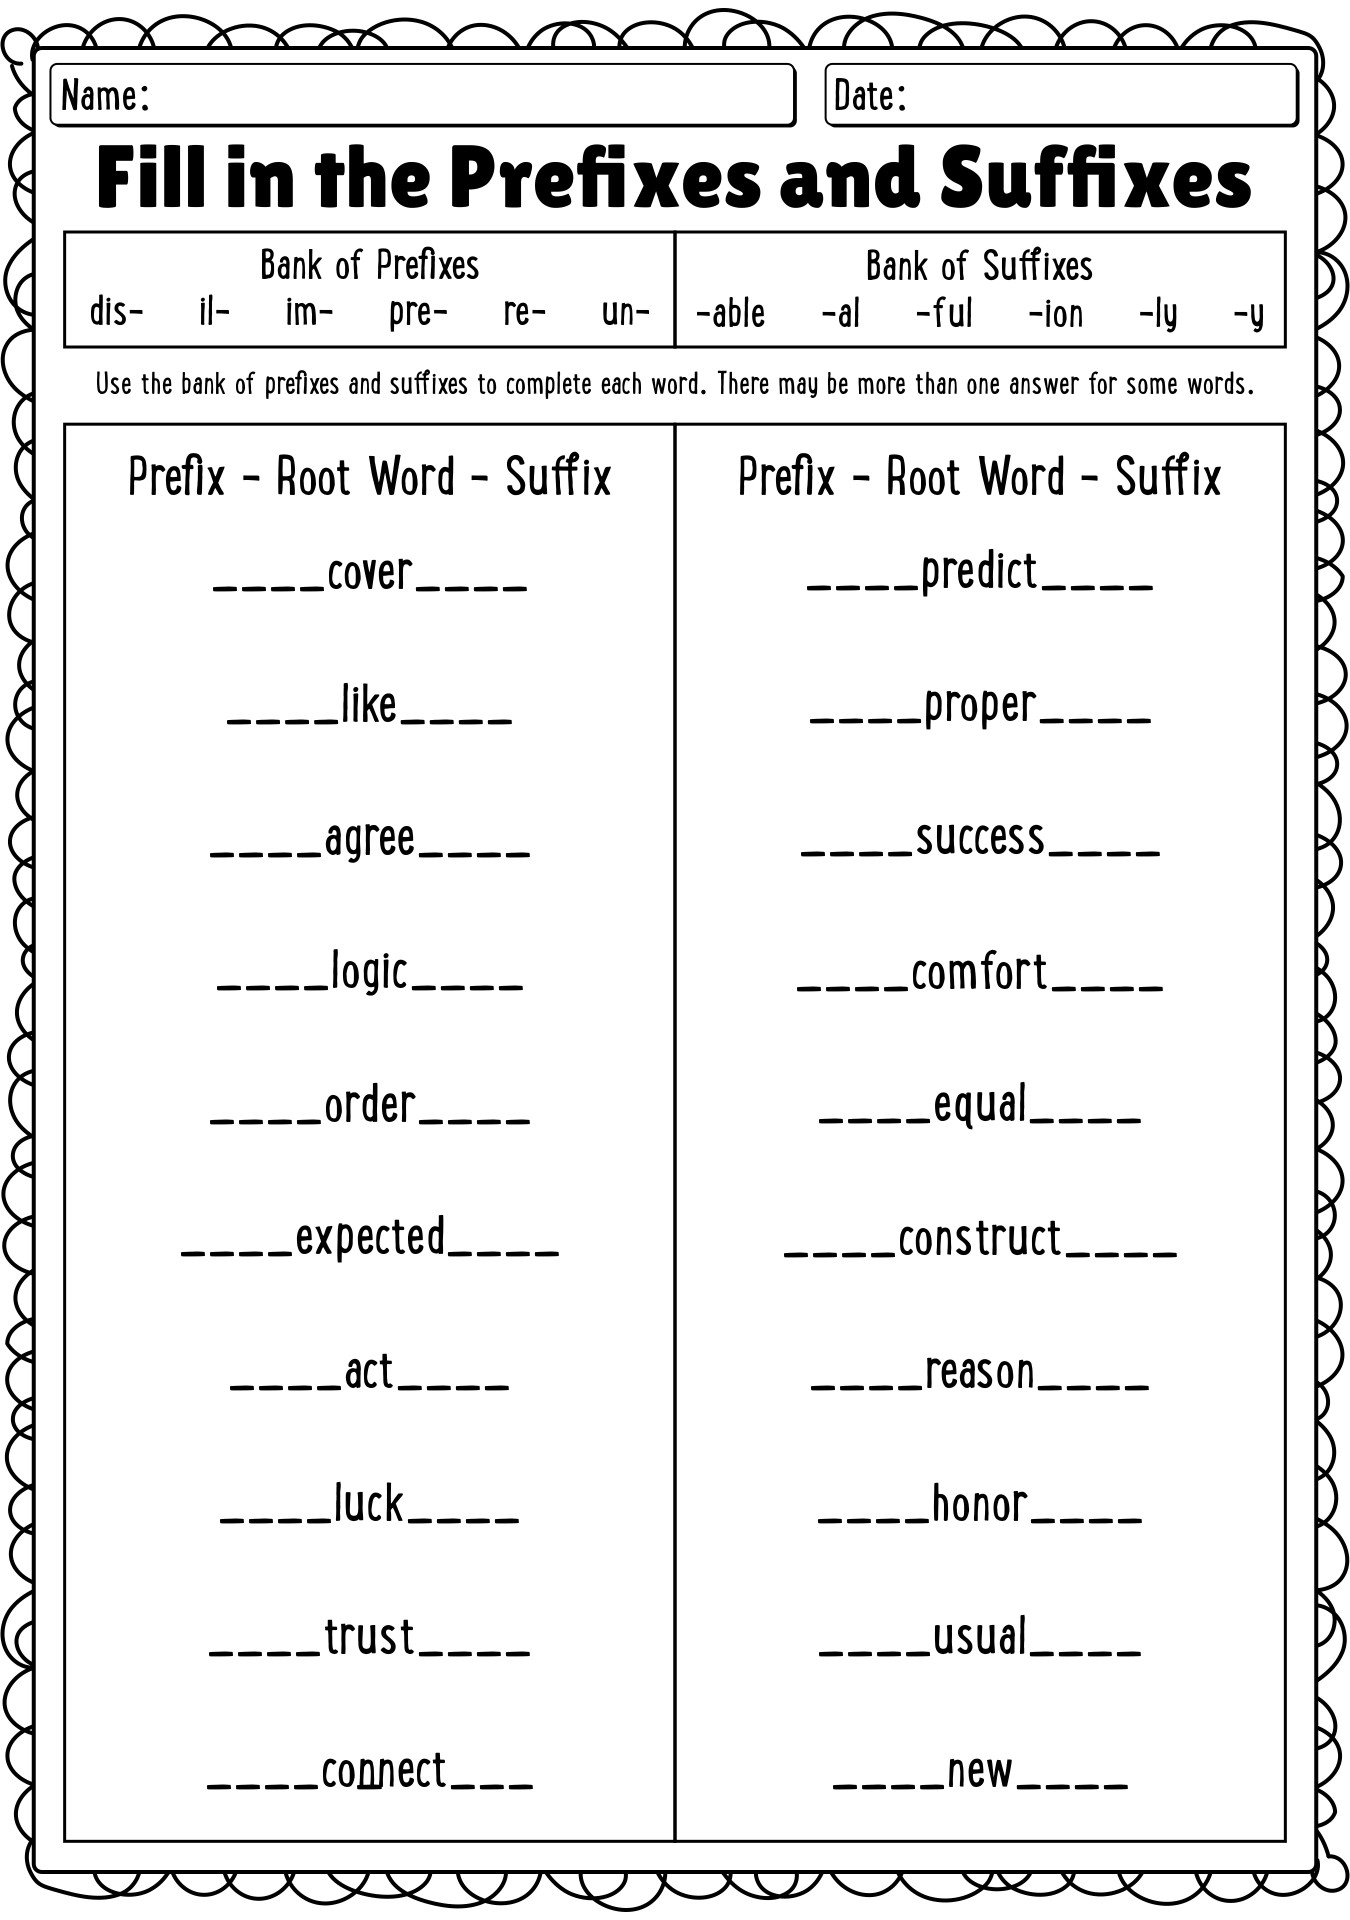 15 Roots Prefixes And Suffixes Worksheets / worksheeto.com